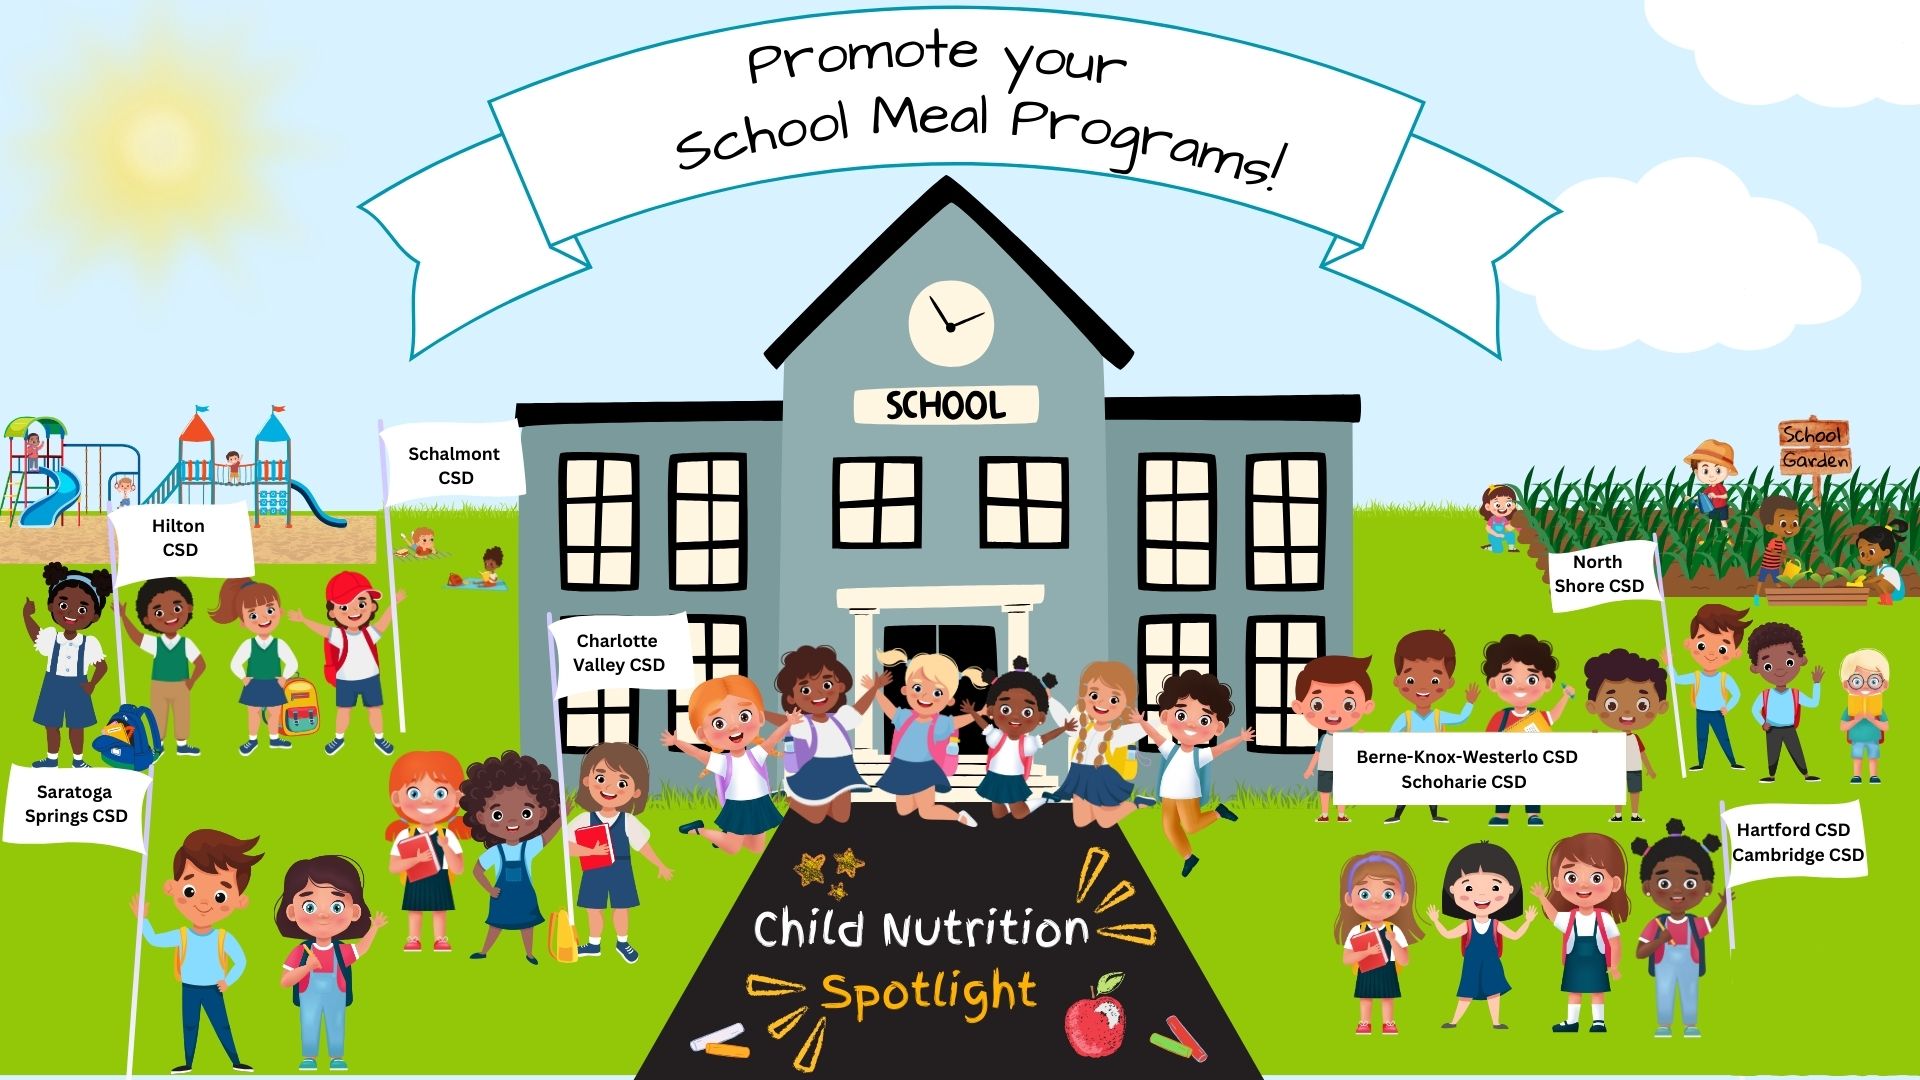 Promote your School Meal Programs!